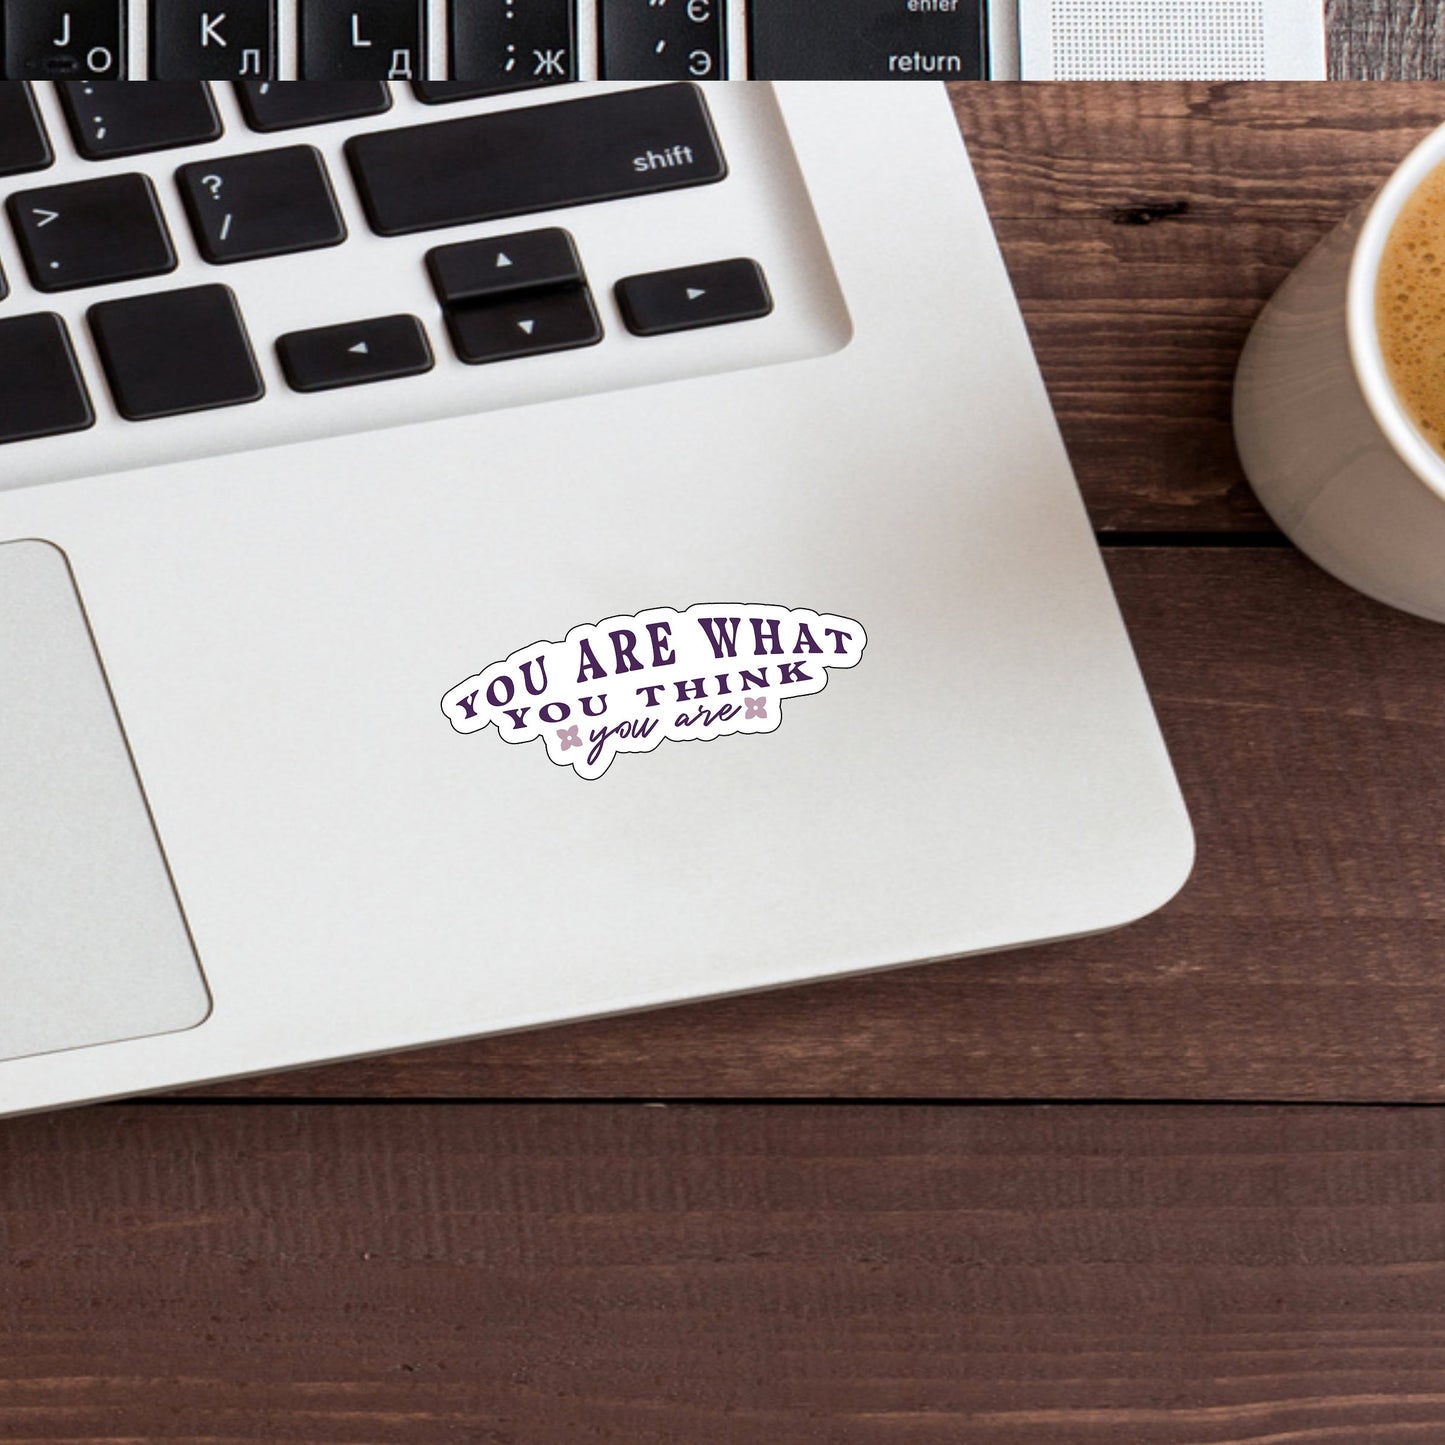 You are what you think you are  Sticker,  Vinyl sticker, laptop sticker, Tablet sticker